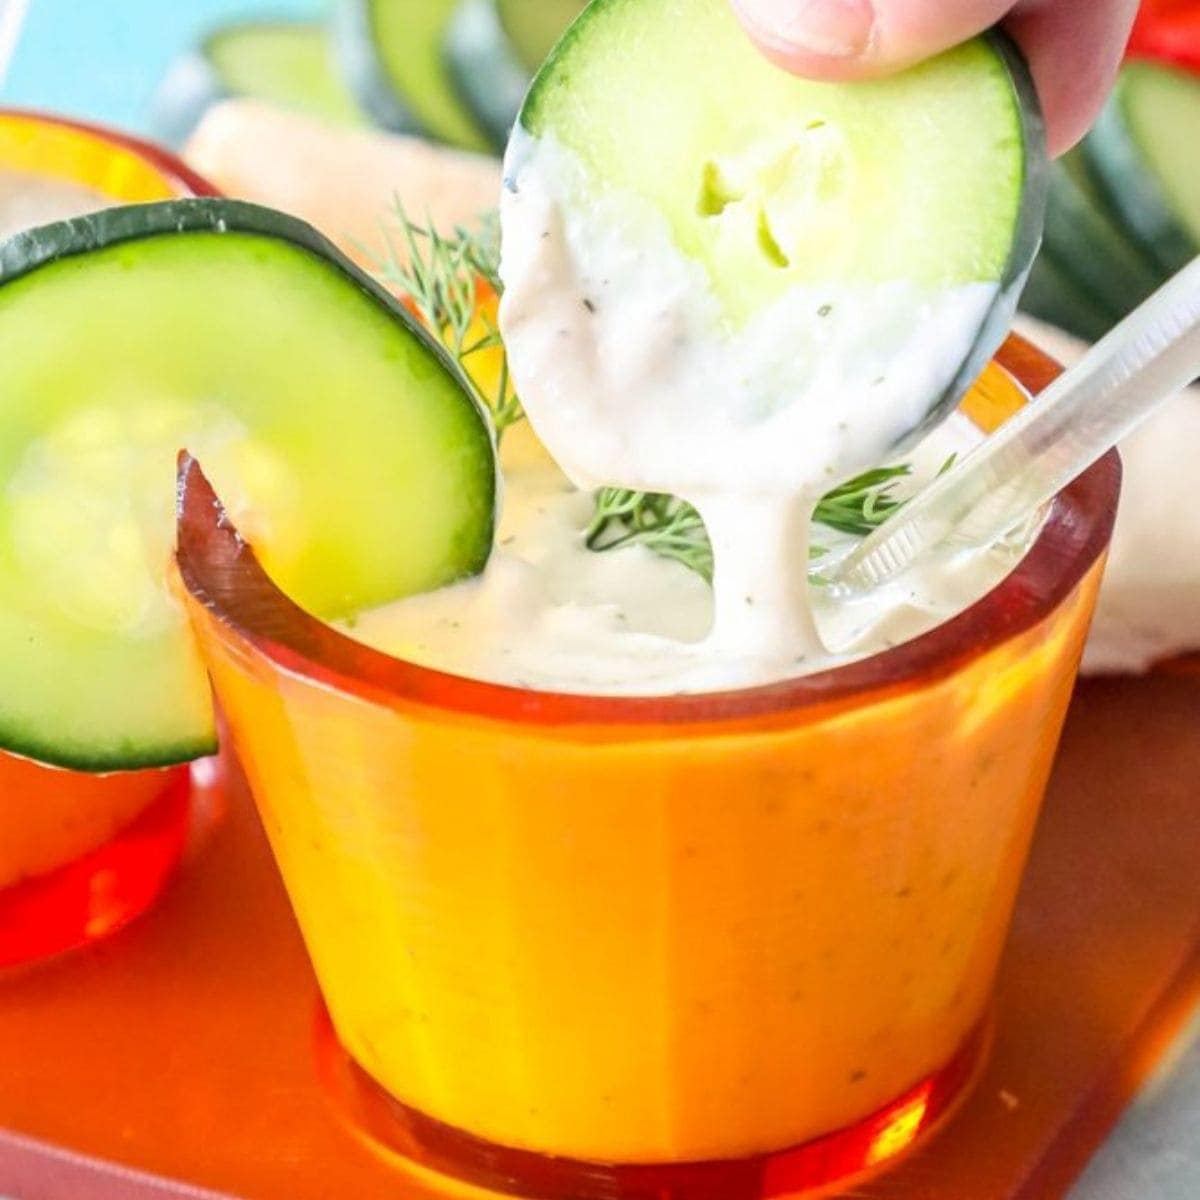 a slice of cucumber being dipped into tzatziki sauce in an orange cup